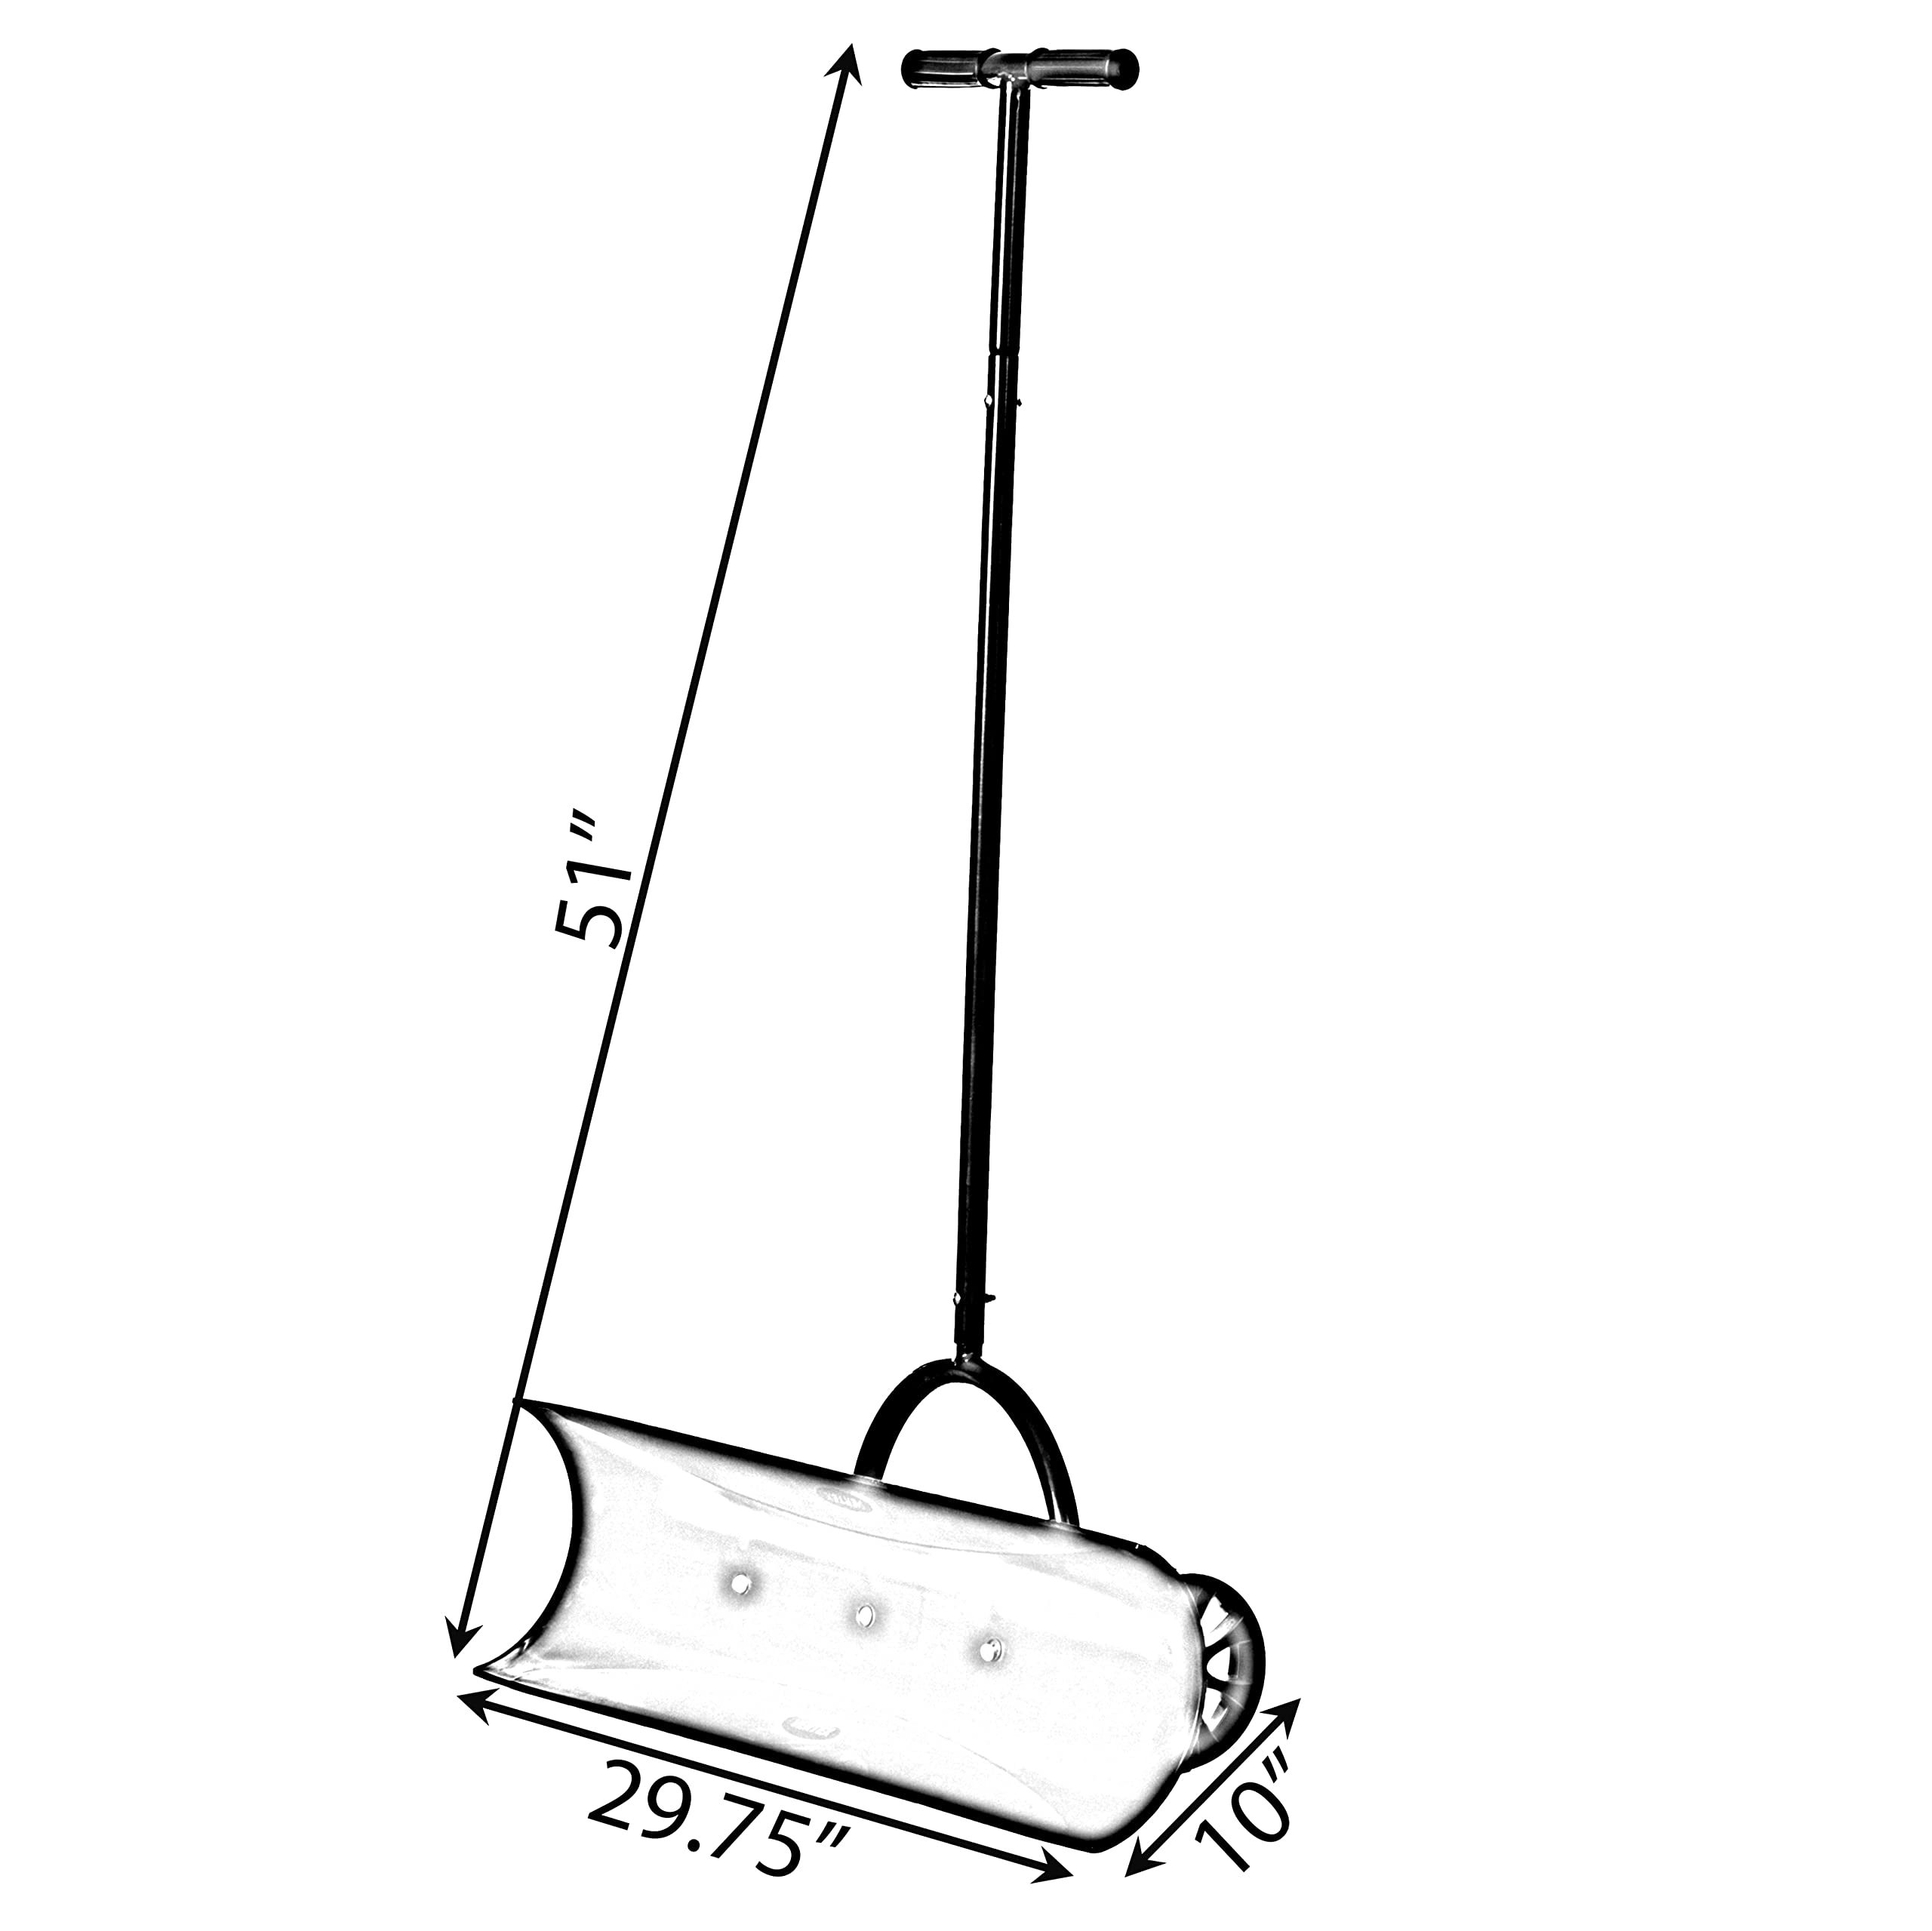 Gardenised Black Heavy Duty Snow Shovel Rolling Pusher Remover with Wheels and Wide Blades, (QI004186)